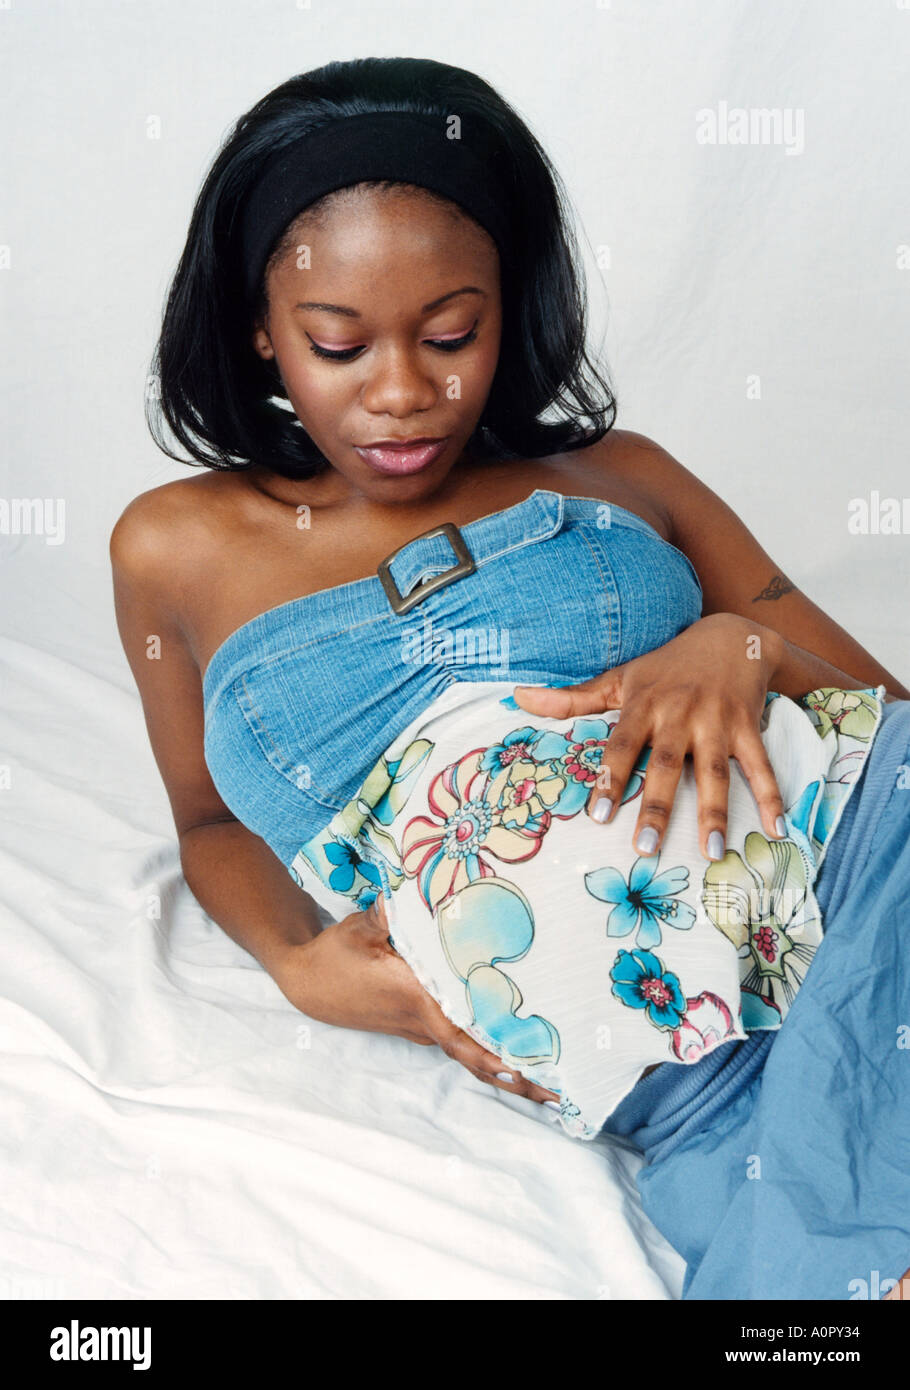 Portrait of a Pregnant Black Girl in a Blue Dress Stock Photo